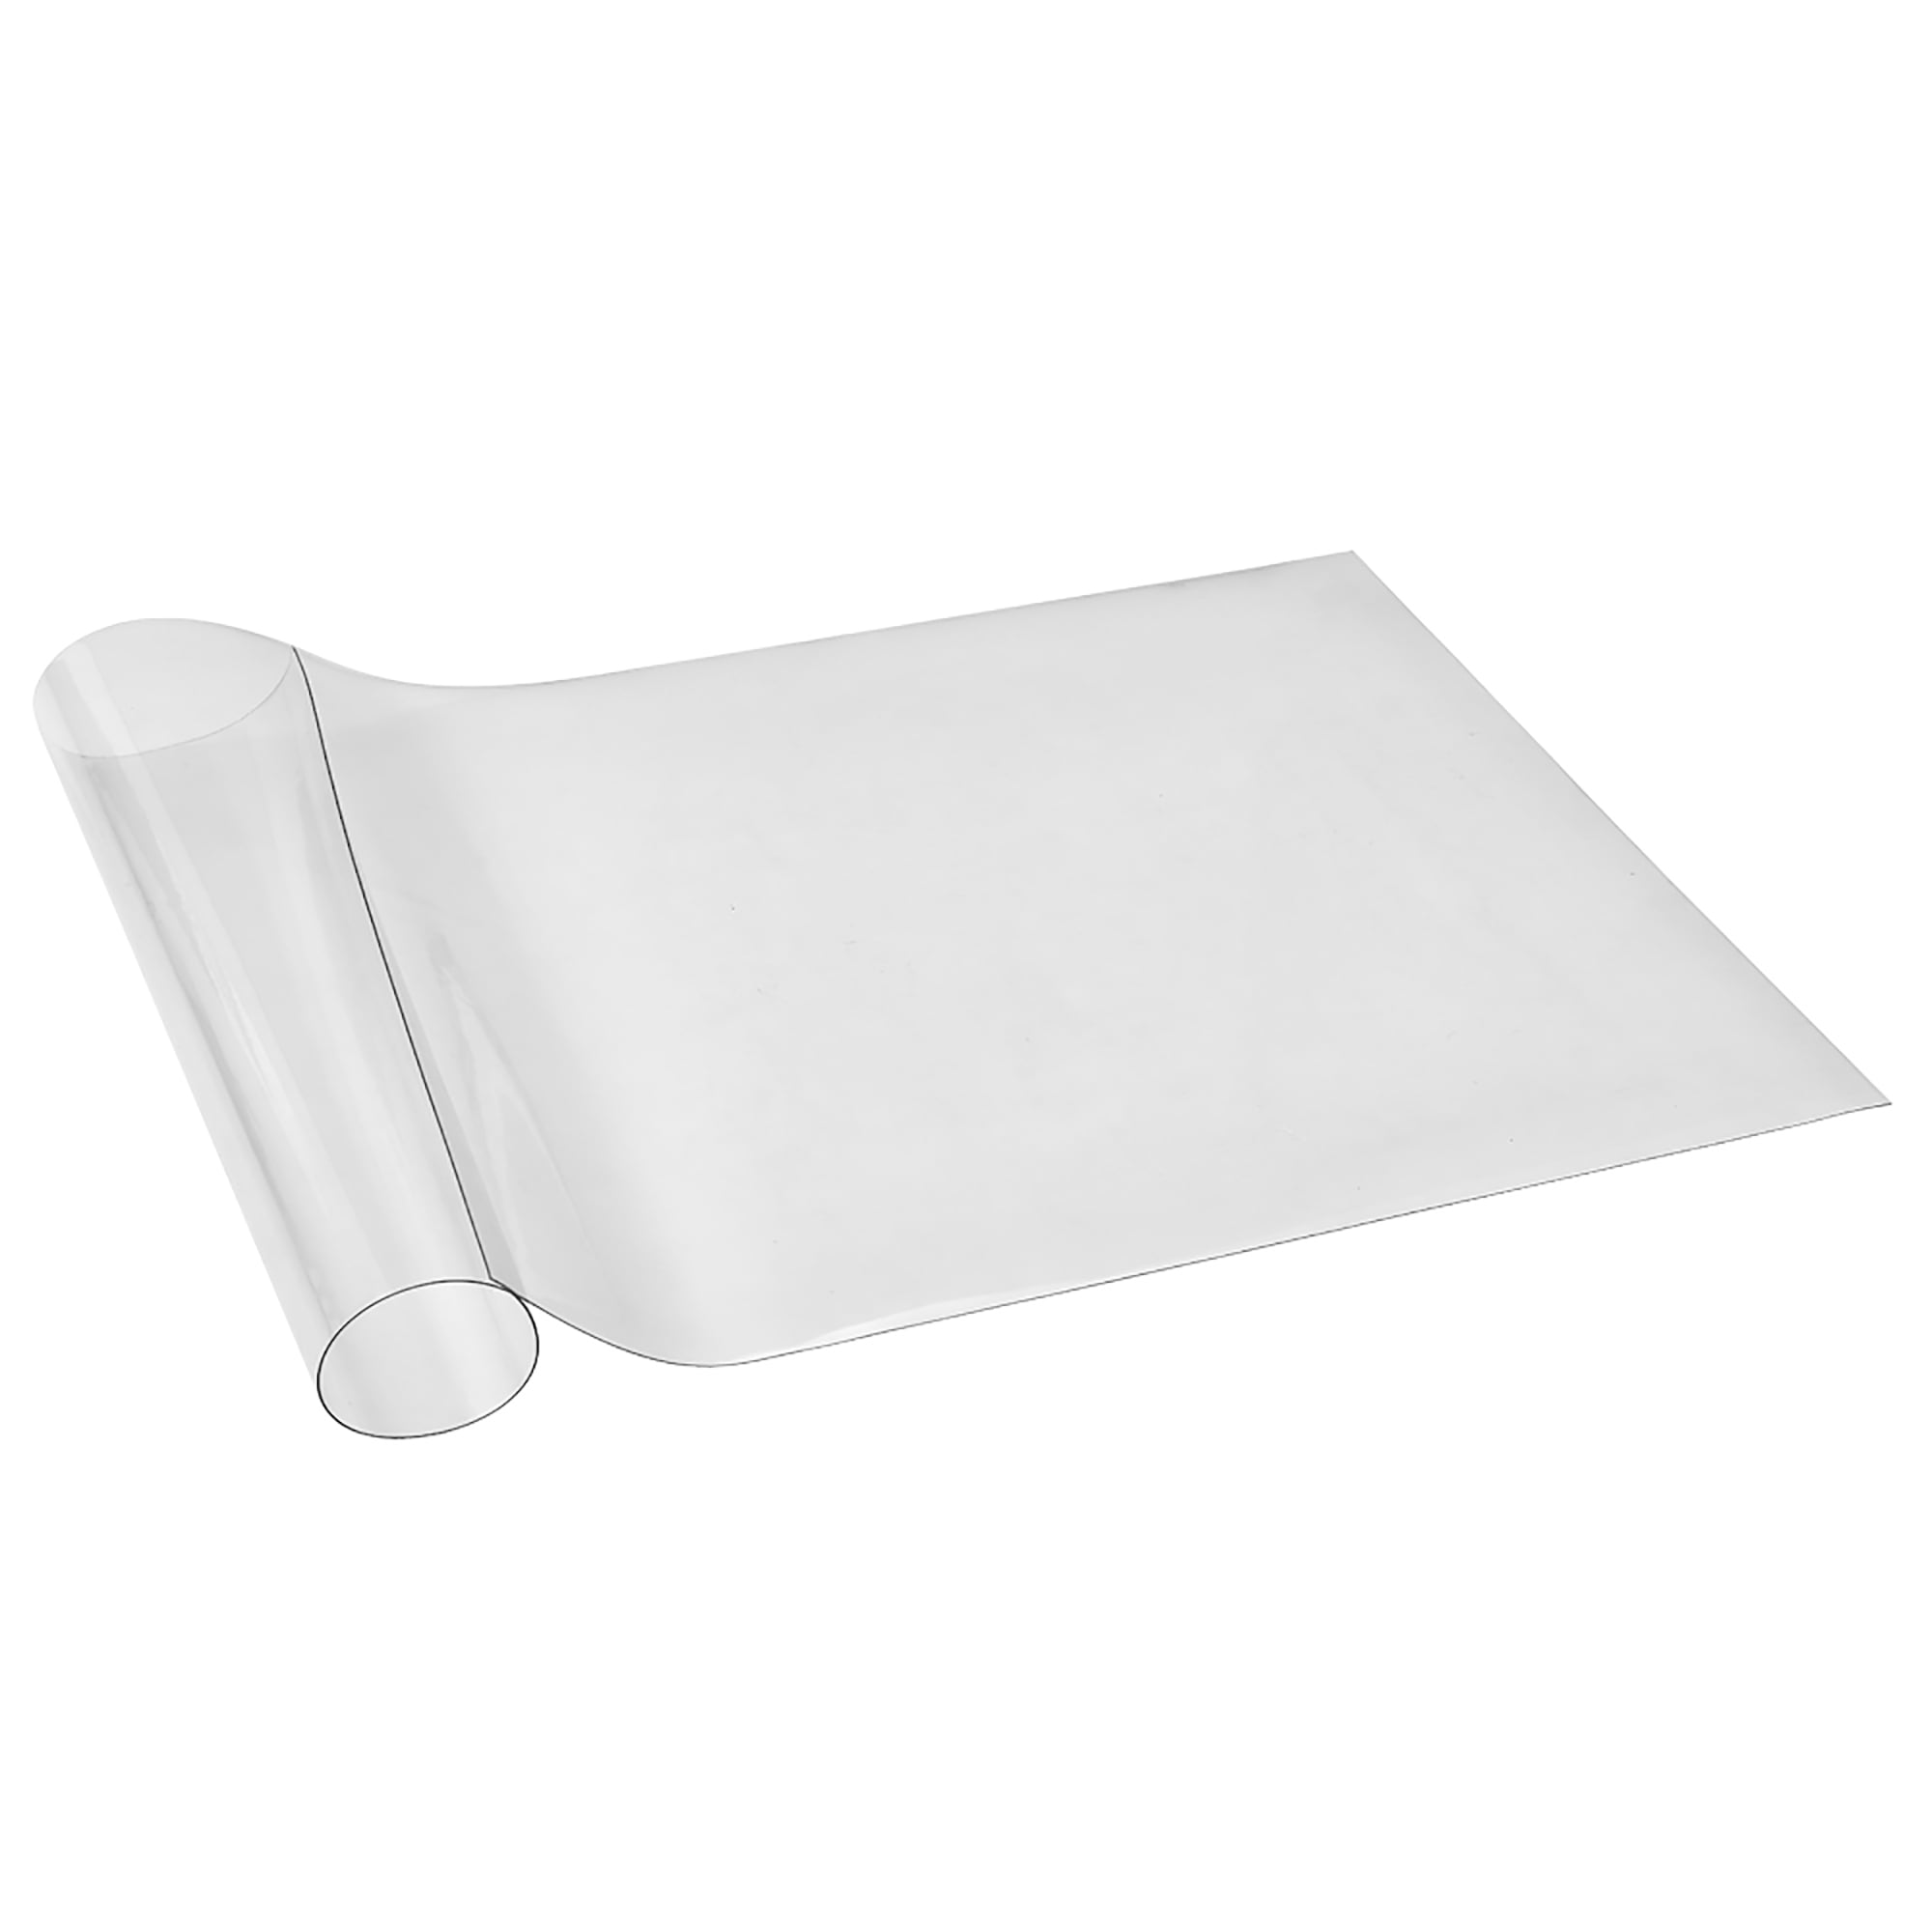 KSHG Upgrade Odorless Table Cover Clear Plastic Desk Protector 18×24 Inch 1.5mm Thickness Waterproof Table Cover Dresser Coffee Dining Table Cover Multi-Size Optional 